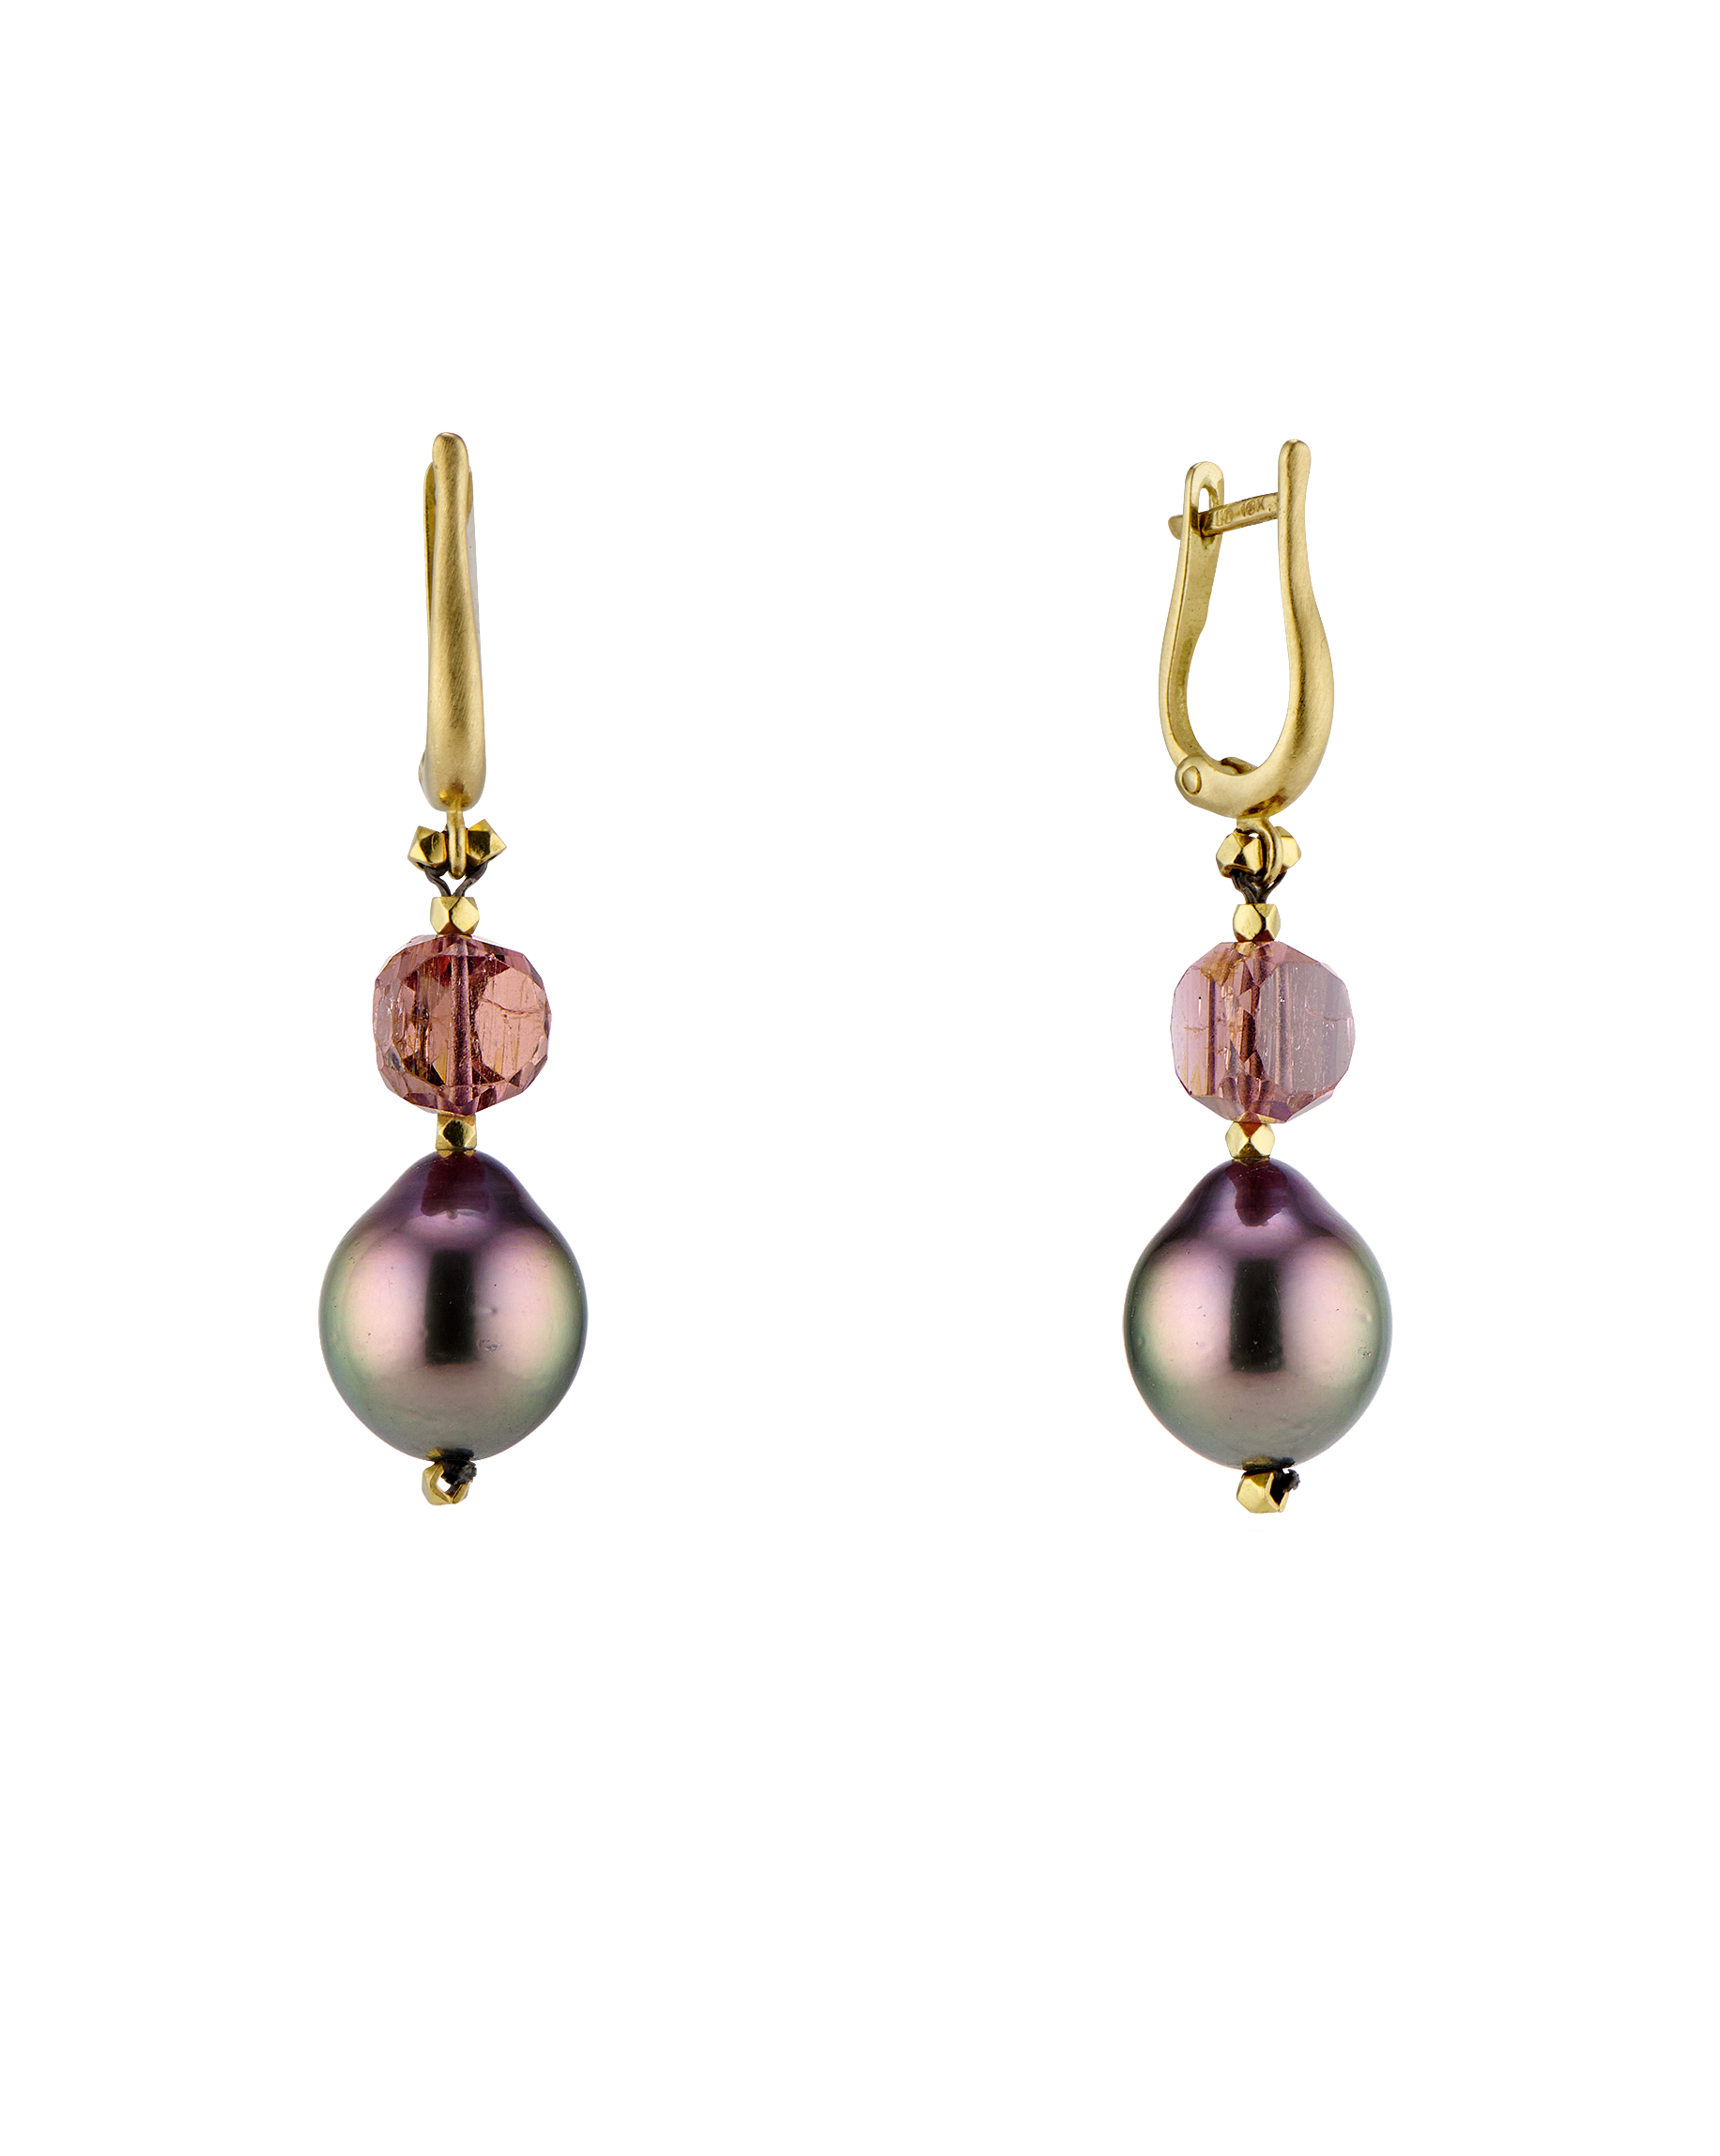 Tahitian pearl and pink tourmaline earrings in 18k gold.